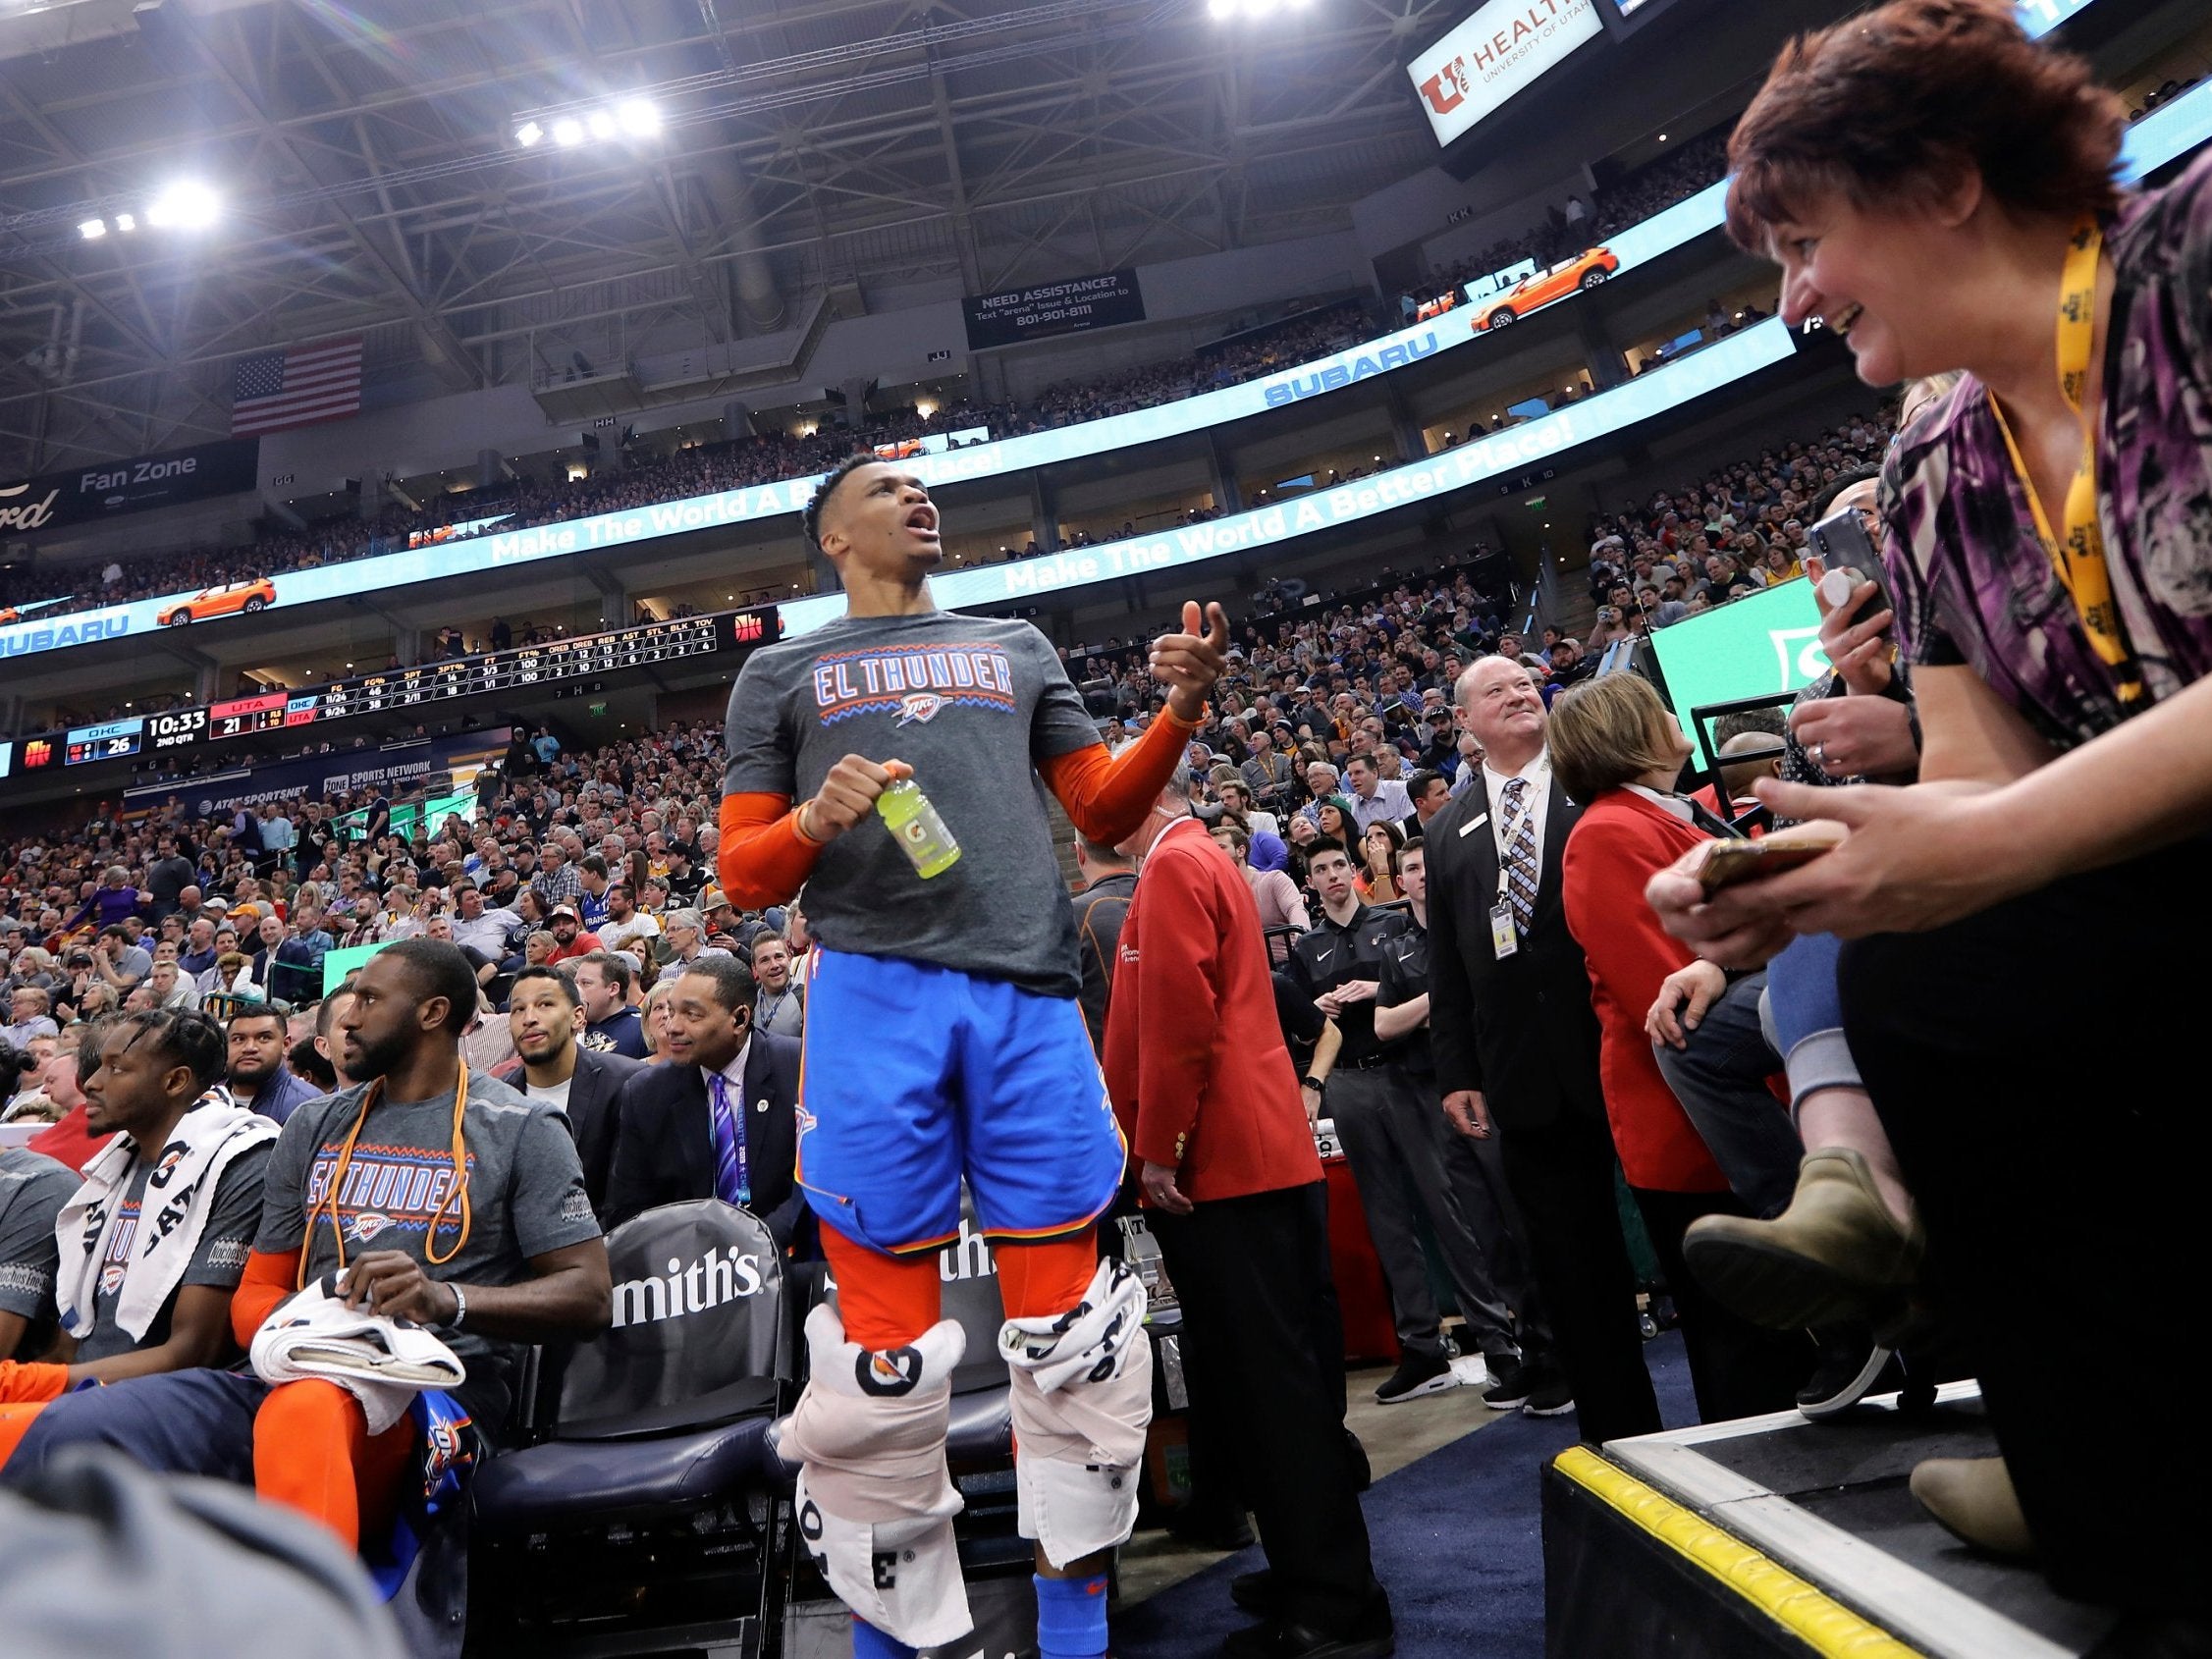 Russell Westbrook fires an insult at a fan